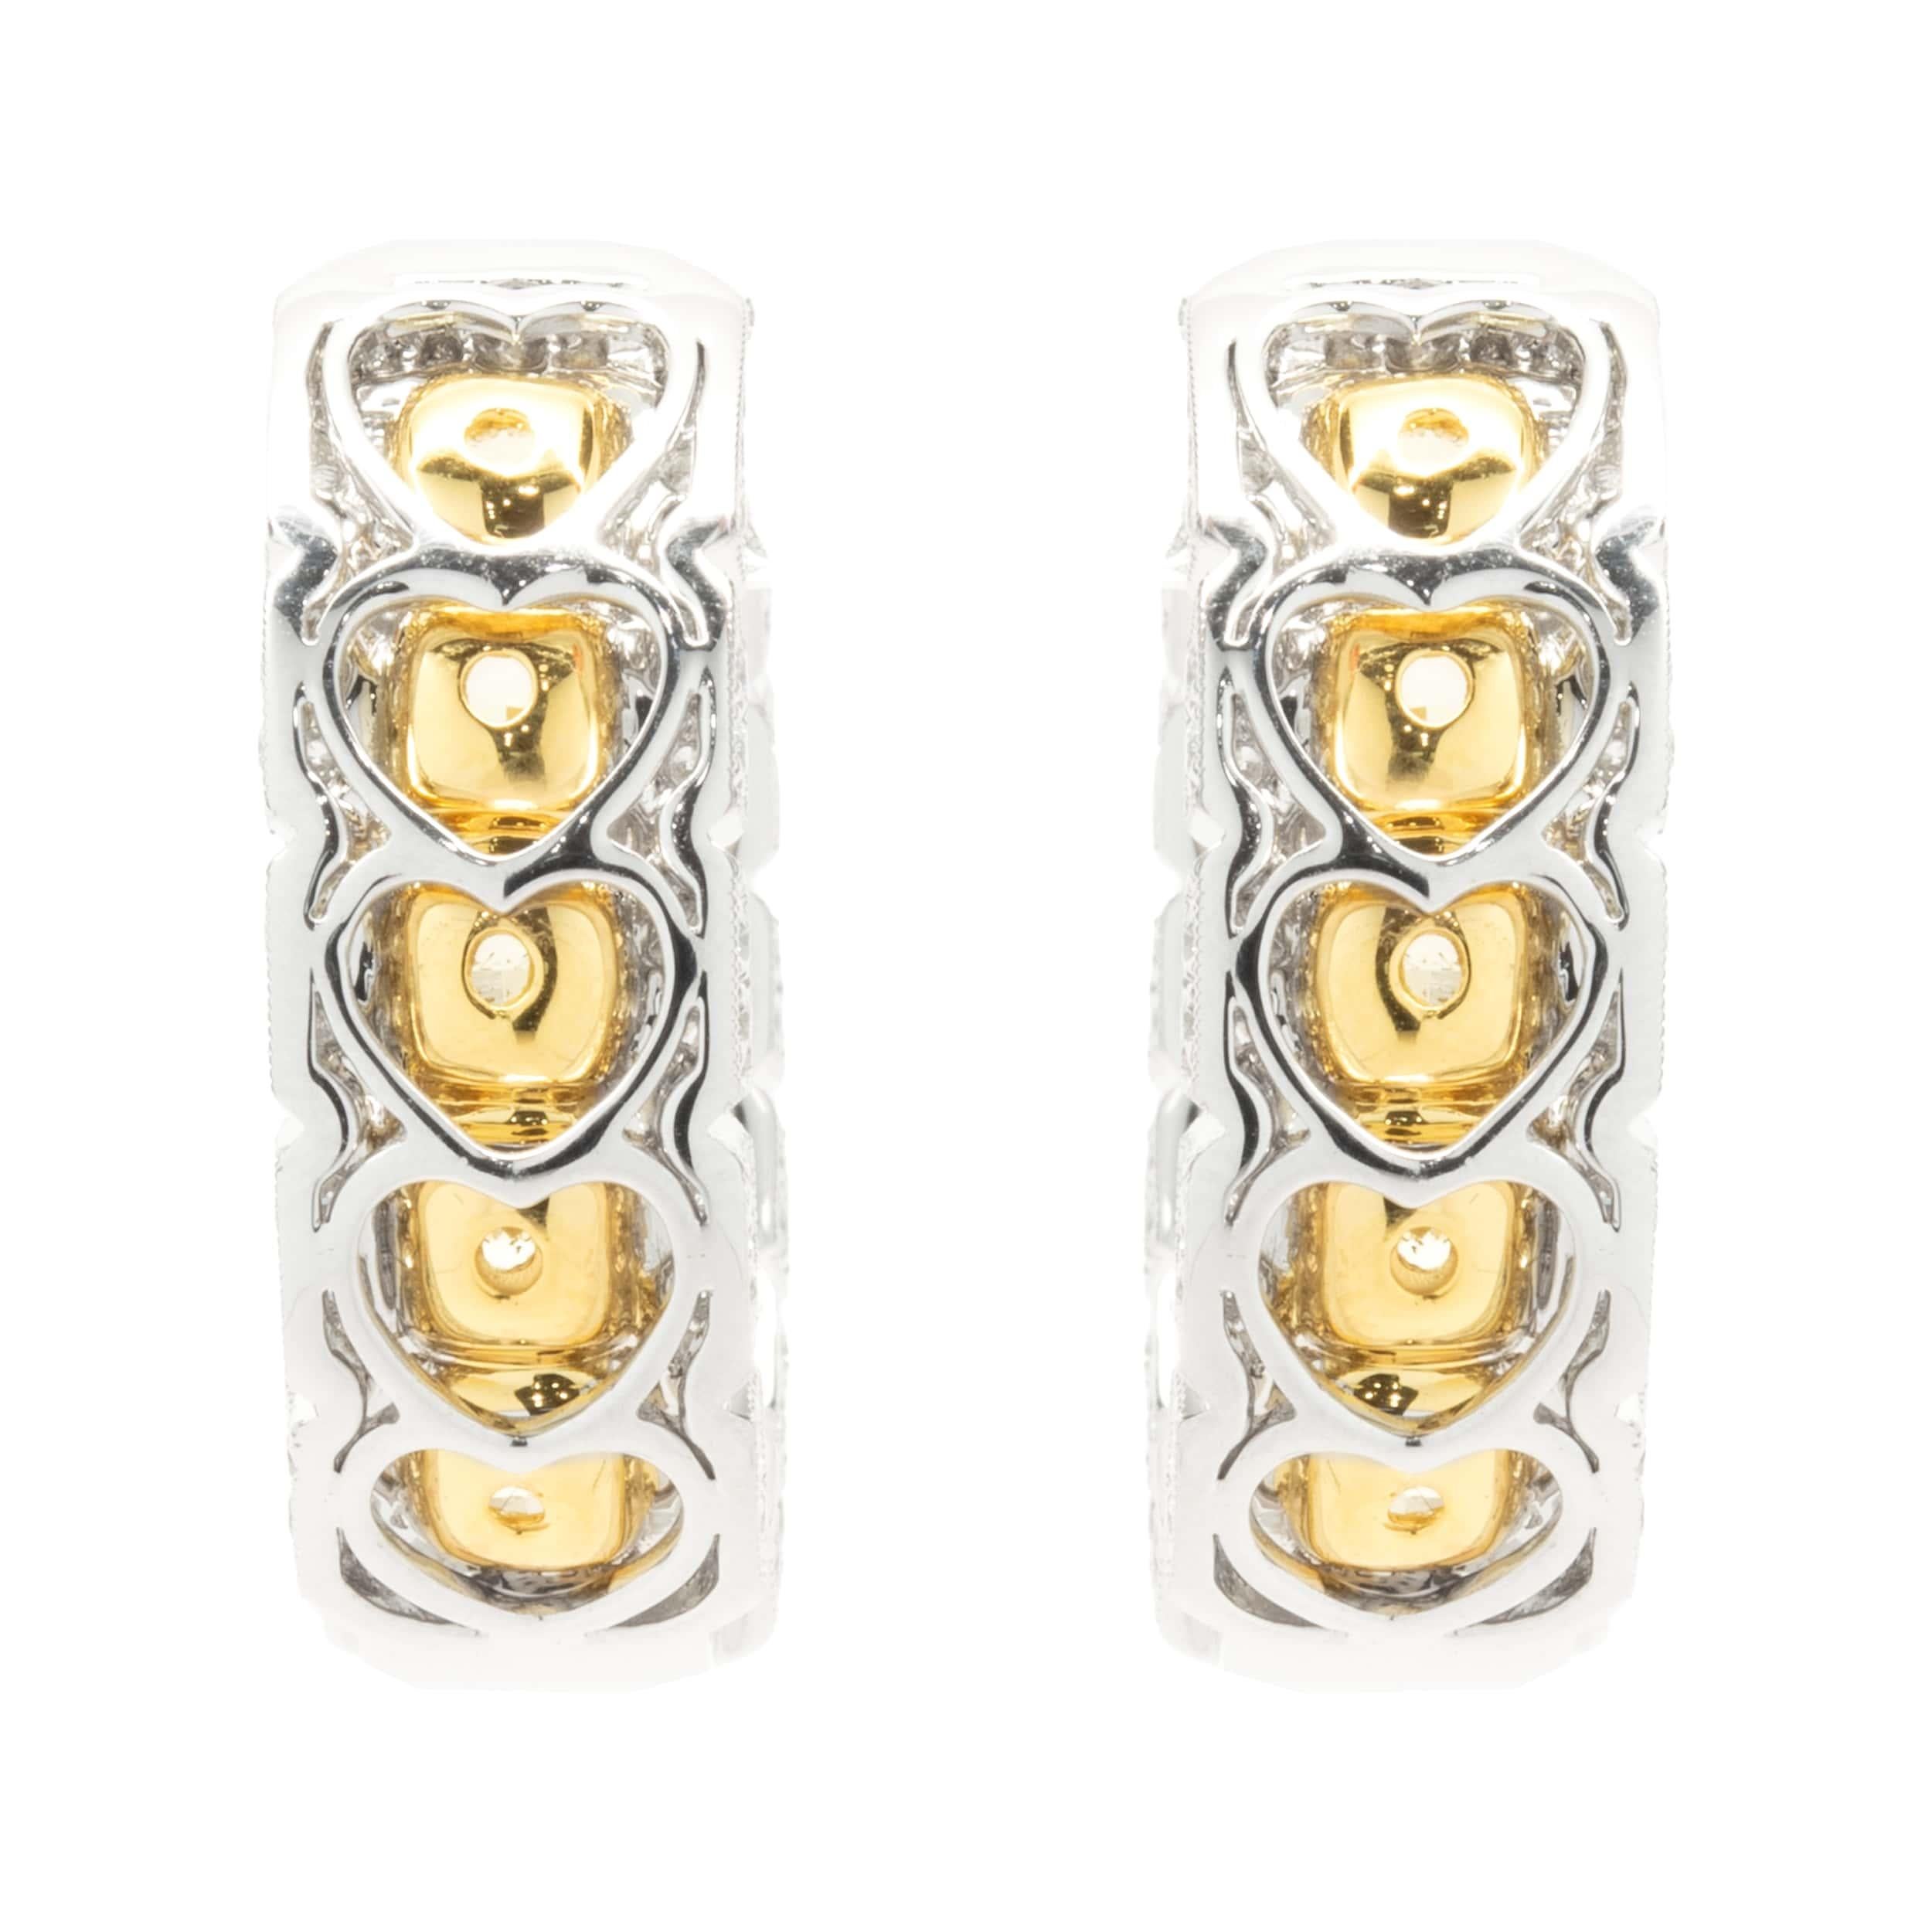 Designer: custom design
Material: 18K white & yellow gold
Diamond: 24 cushion cut = 7.67cttw
Color: Fancy Yellow
Clarity: SI1
Diamond: 288 round brilliant cut = 2.01cttw
Color: G
Clarity: VS2
Dimensions: earrings measure 27mm long
Weight: 29.26 grams